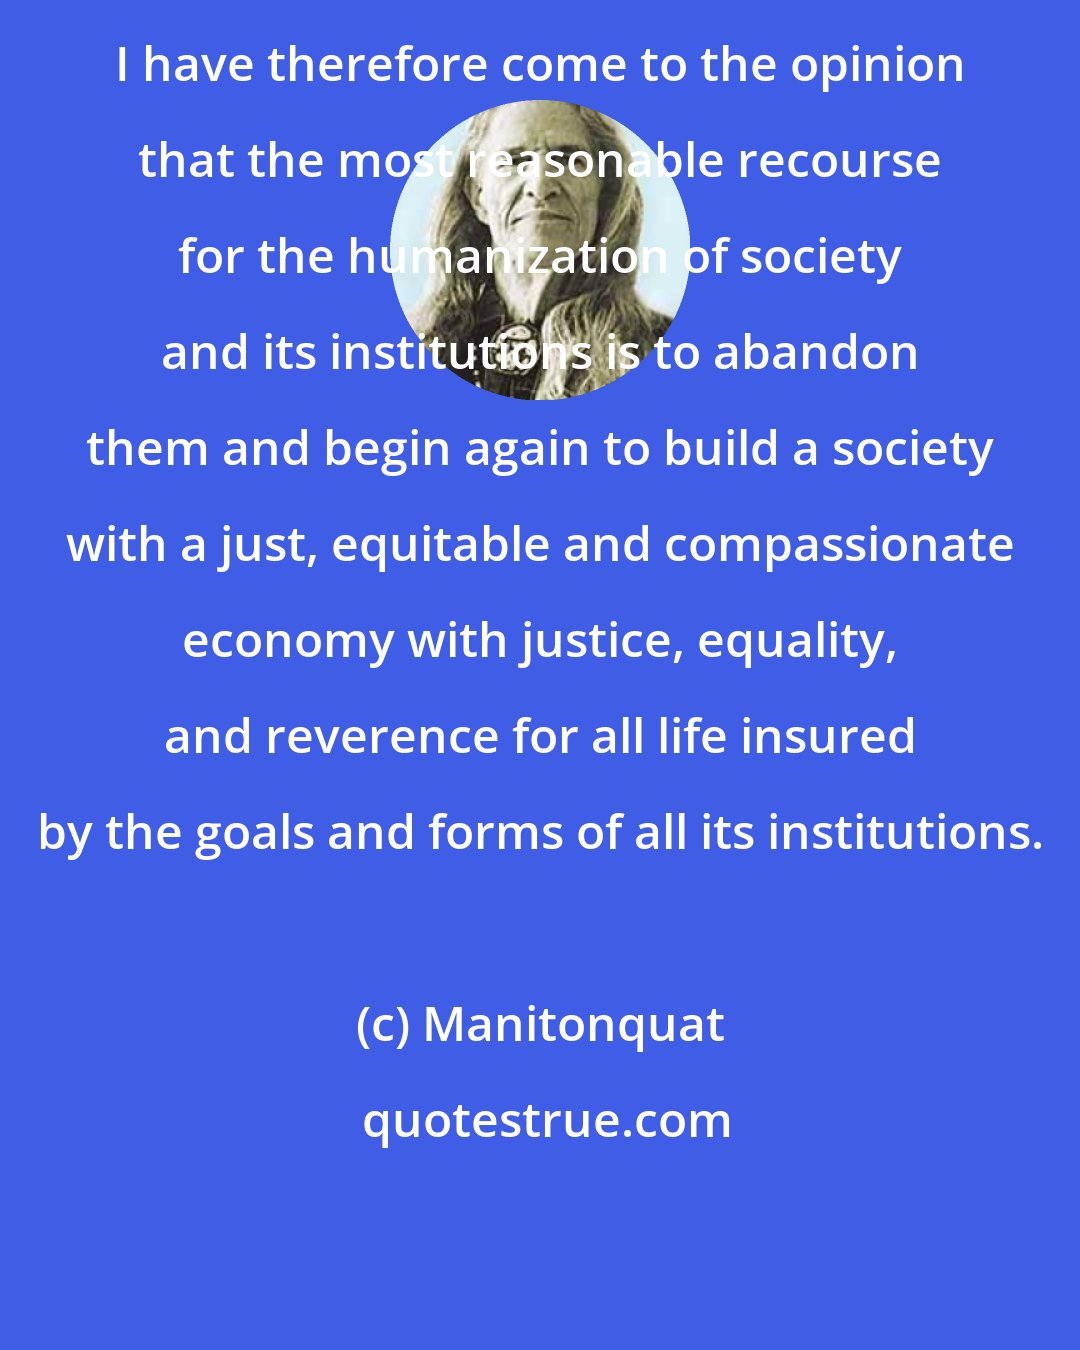 Manitonquat: I have therefore come to the opinion that the most reasonable recourse for the humanization of society and its institutions is to abandon them and begin again to build a society with a just, equitable and compassionate economy with justice, equality, and reverence for all life insured by the goals and forms of all its institutions.